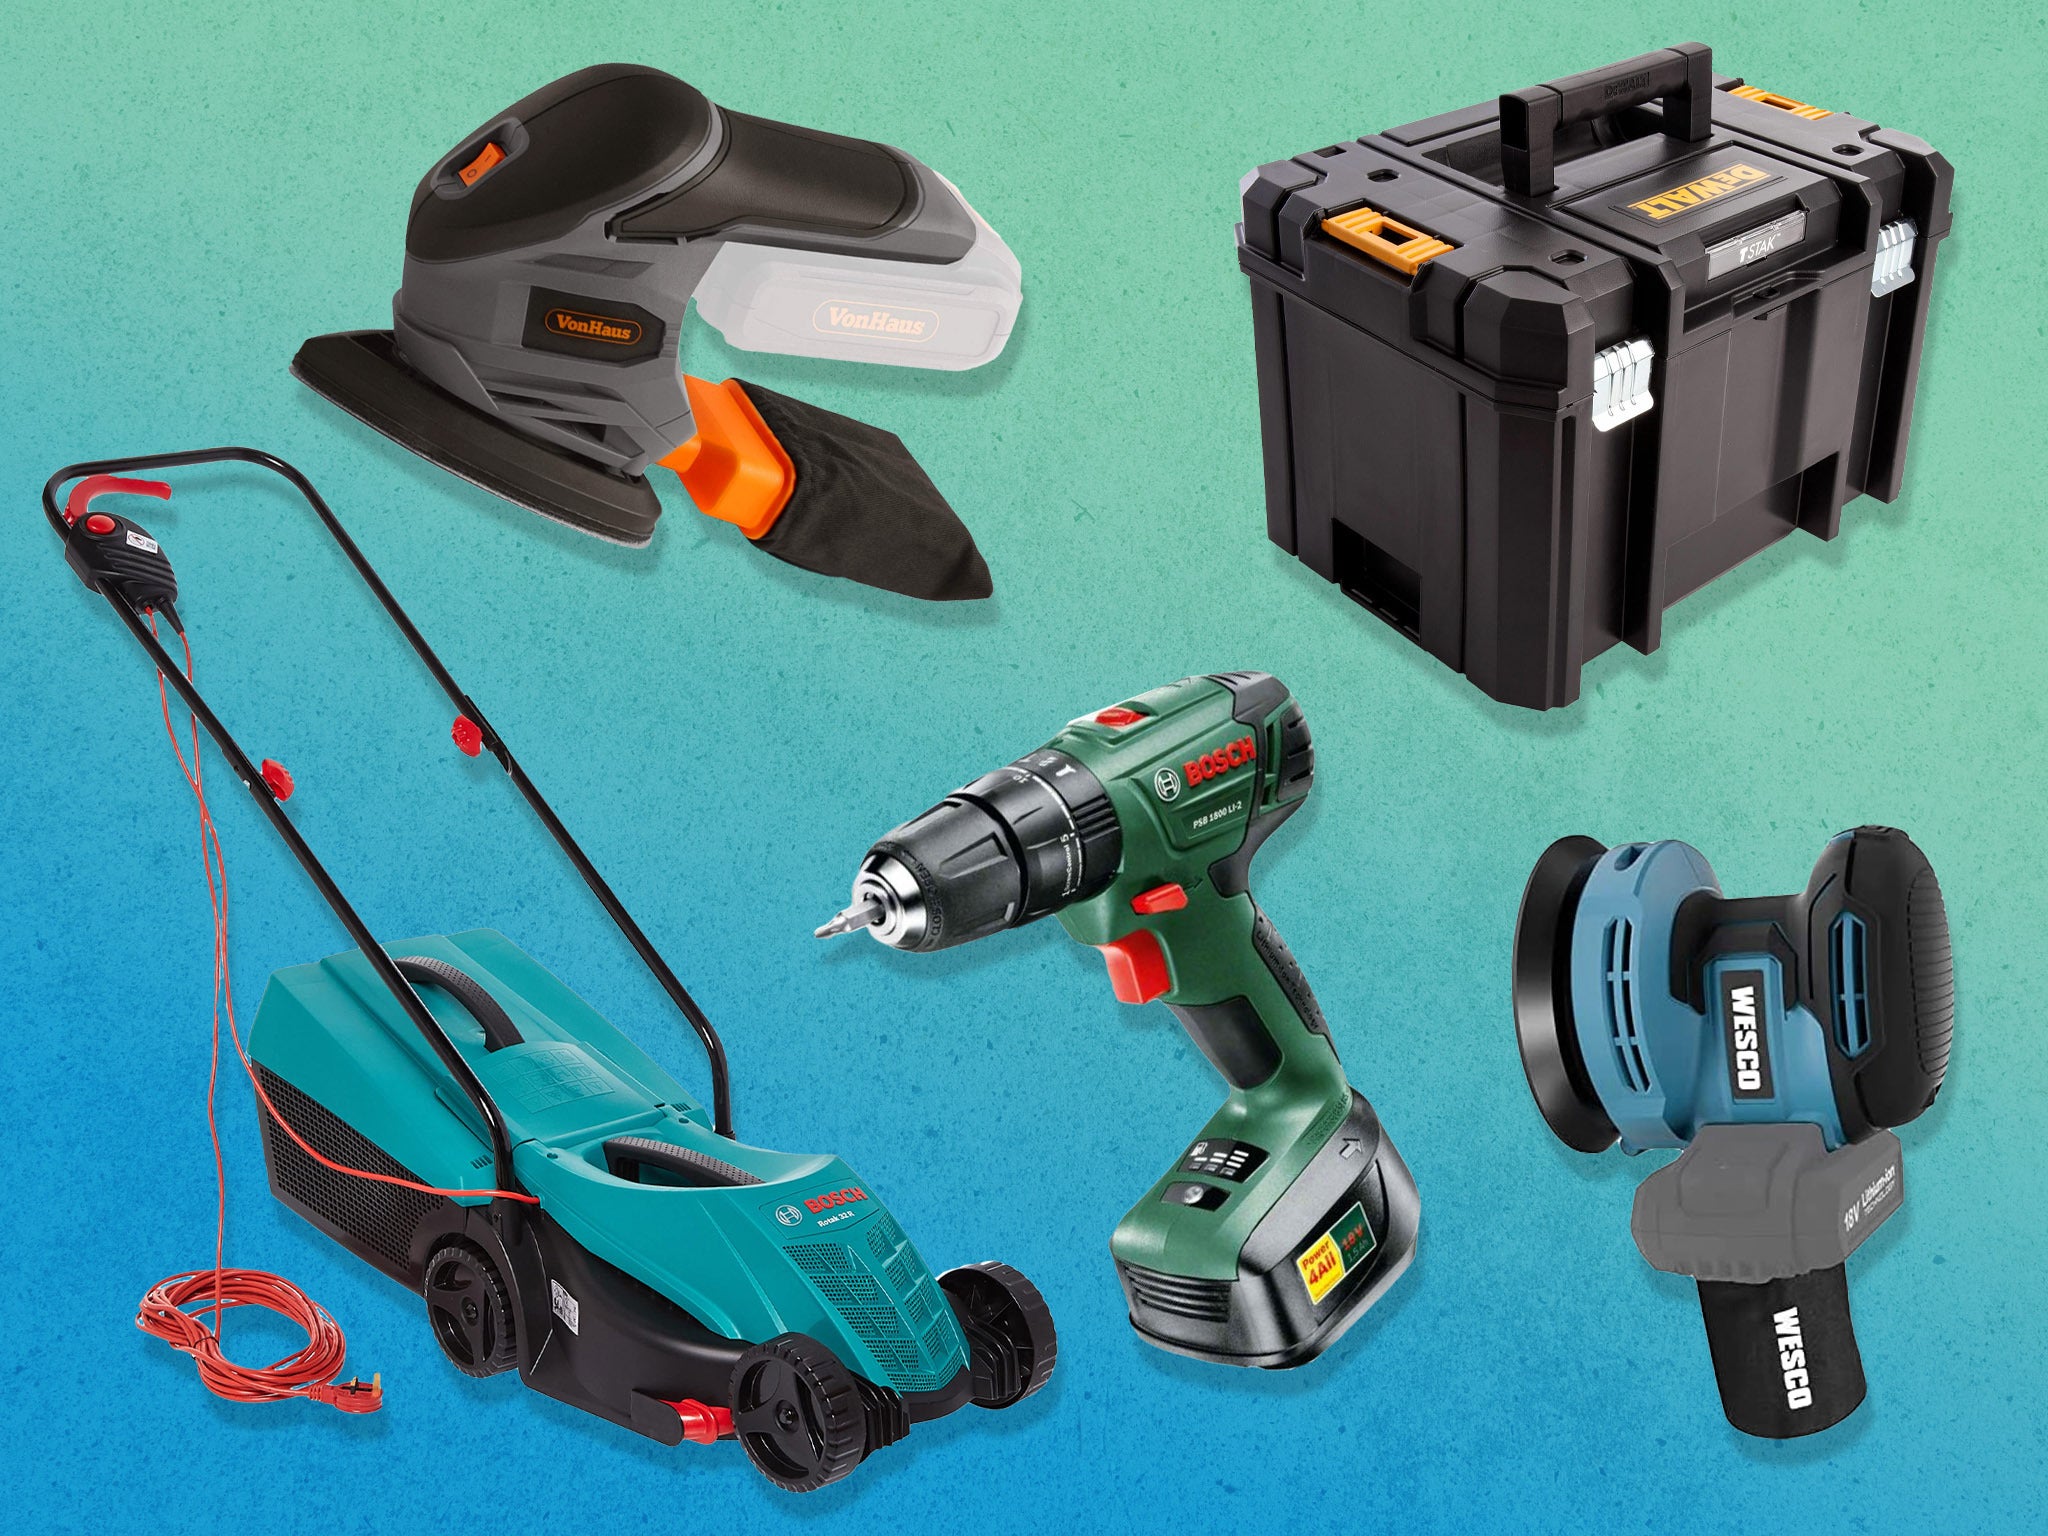 Deal of the Day: Big Savings Today Only on Black+Decker and DeWalt Power  Tools at